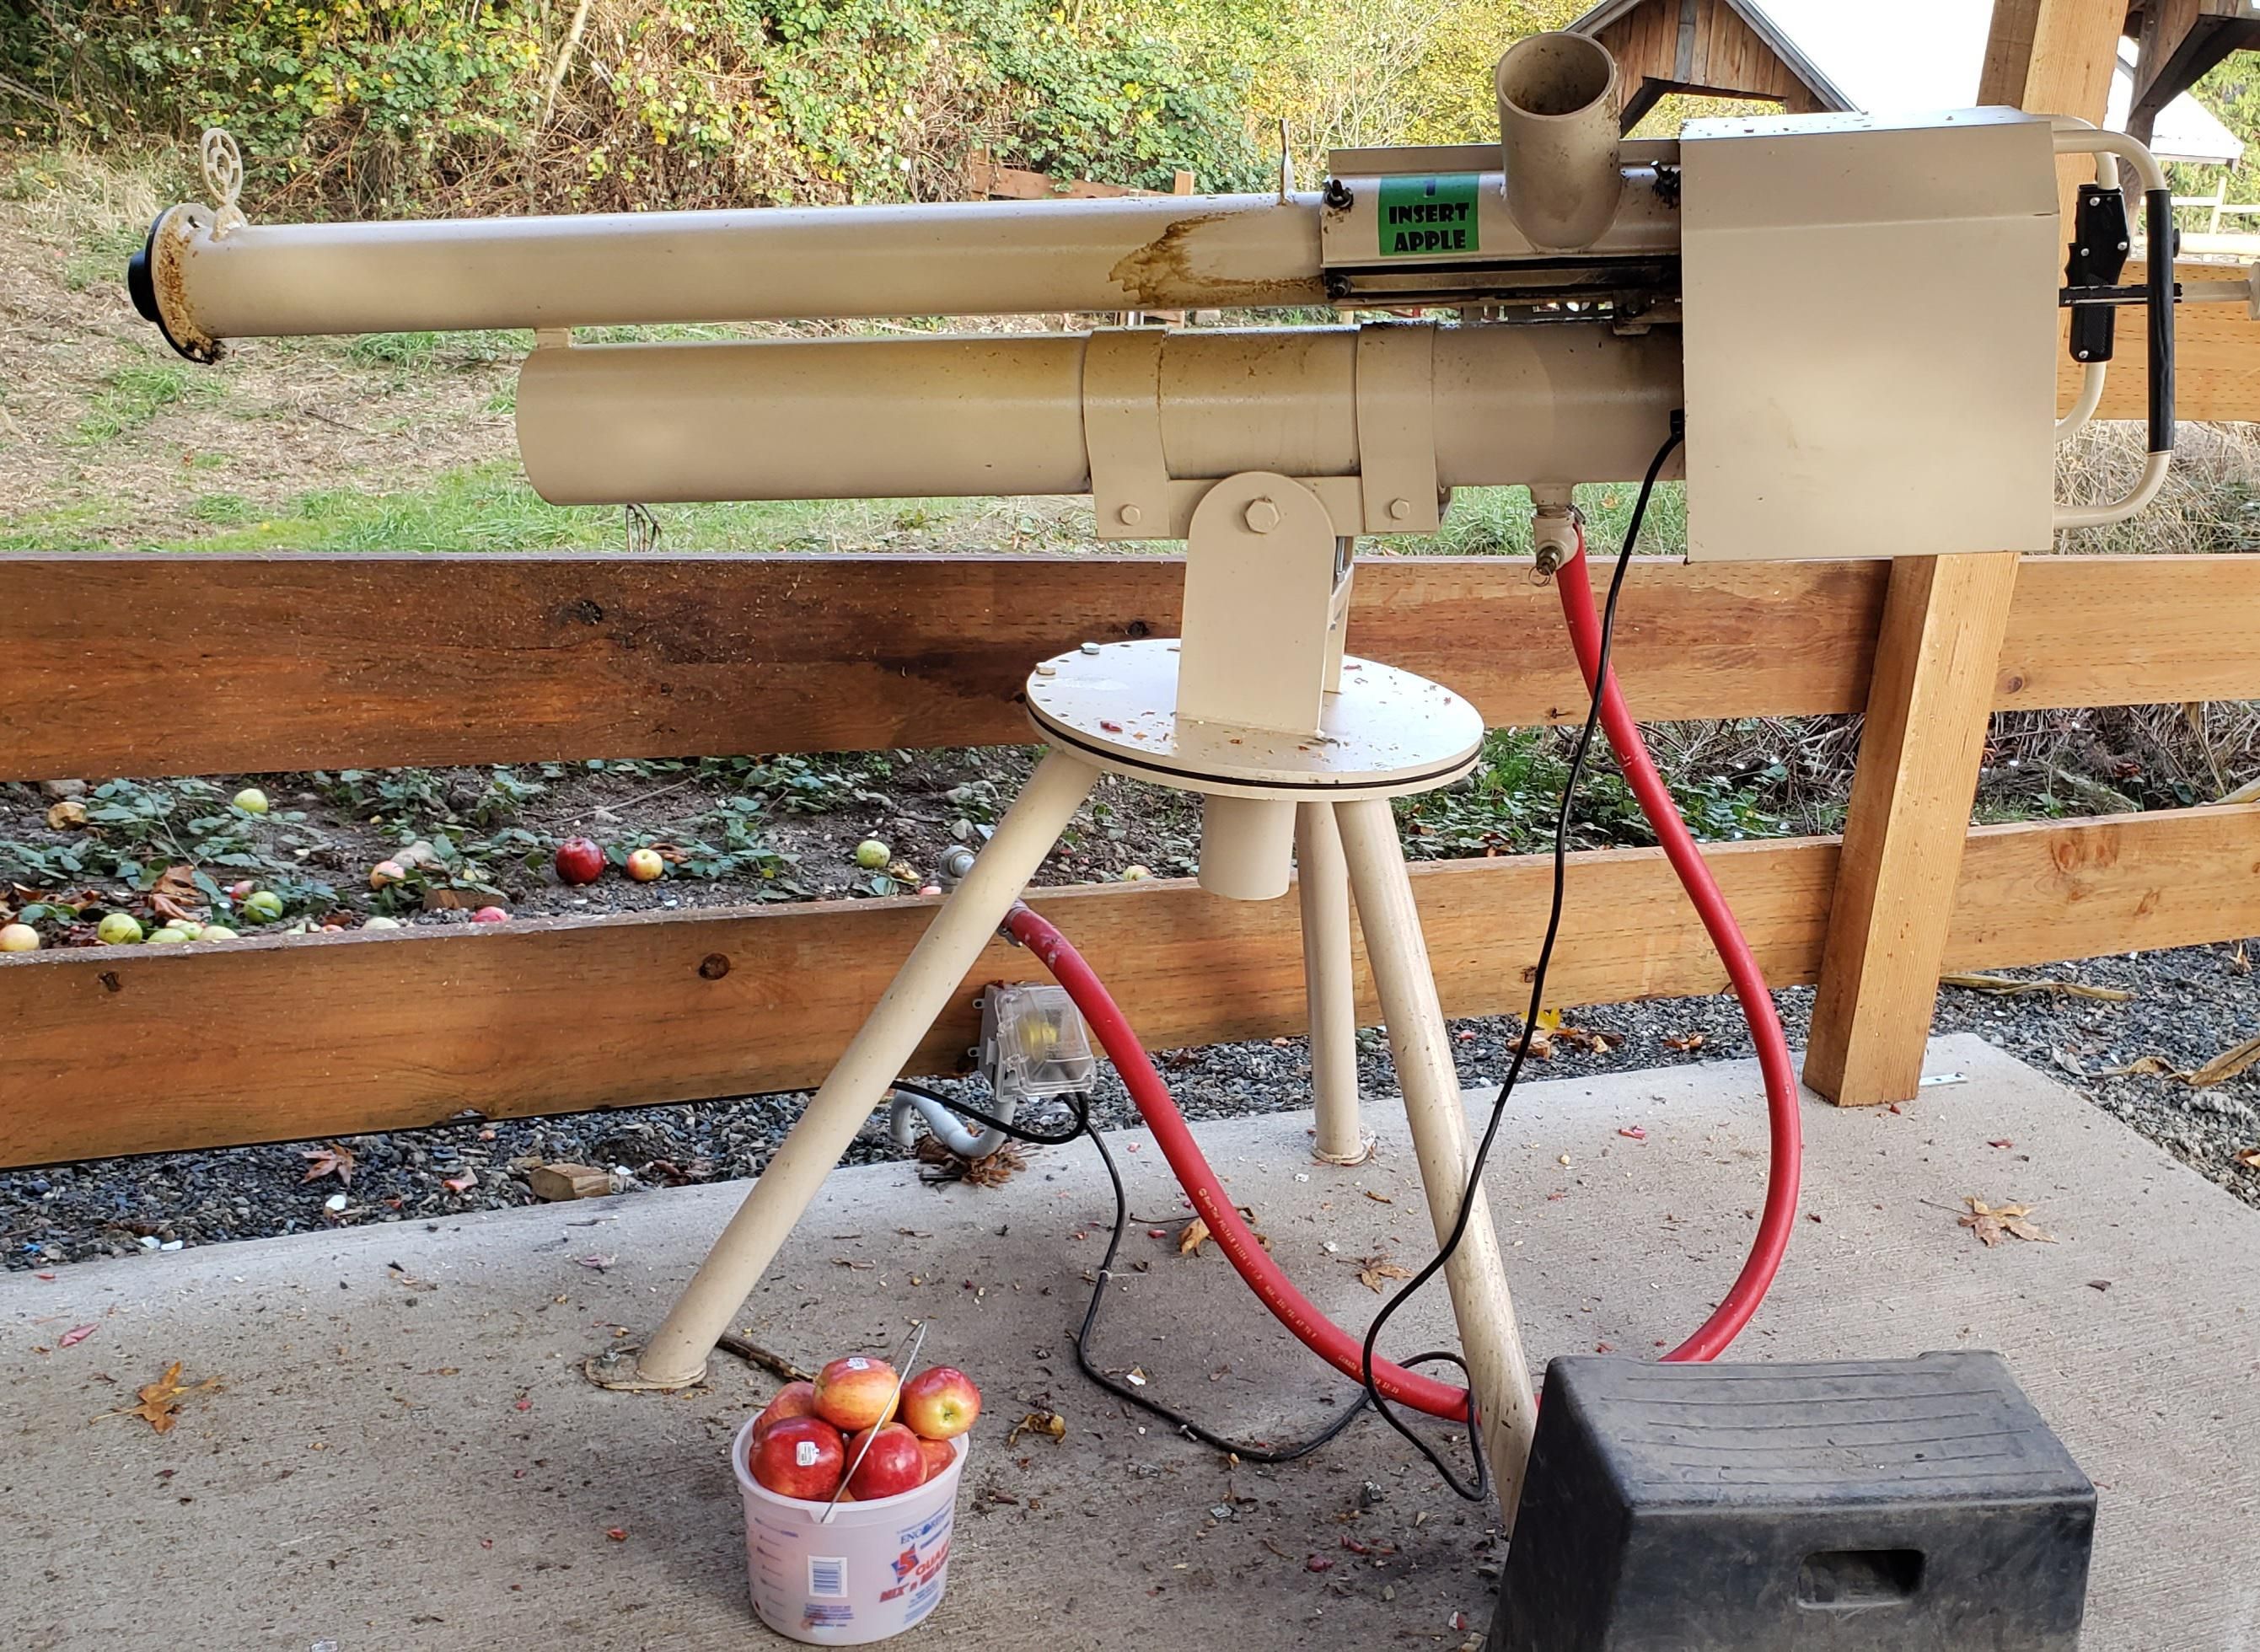 An Apple a day keeps the doctor away especially if you're using compressed air.